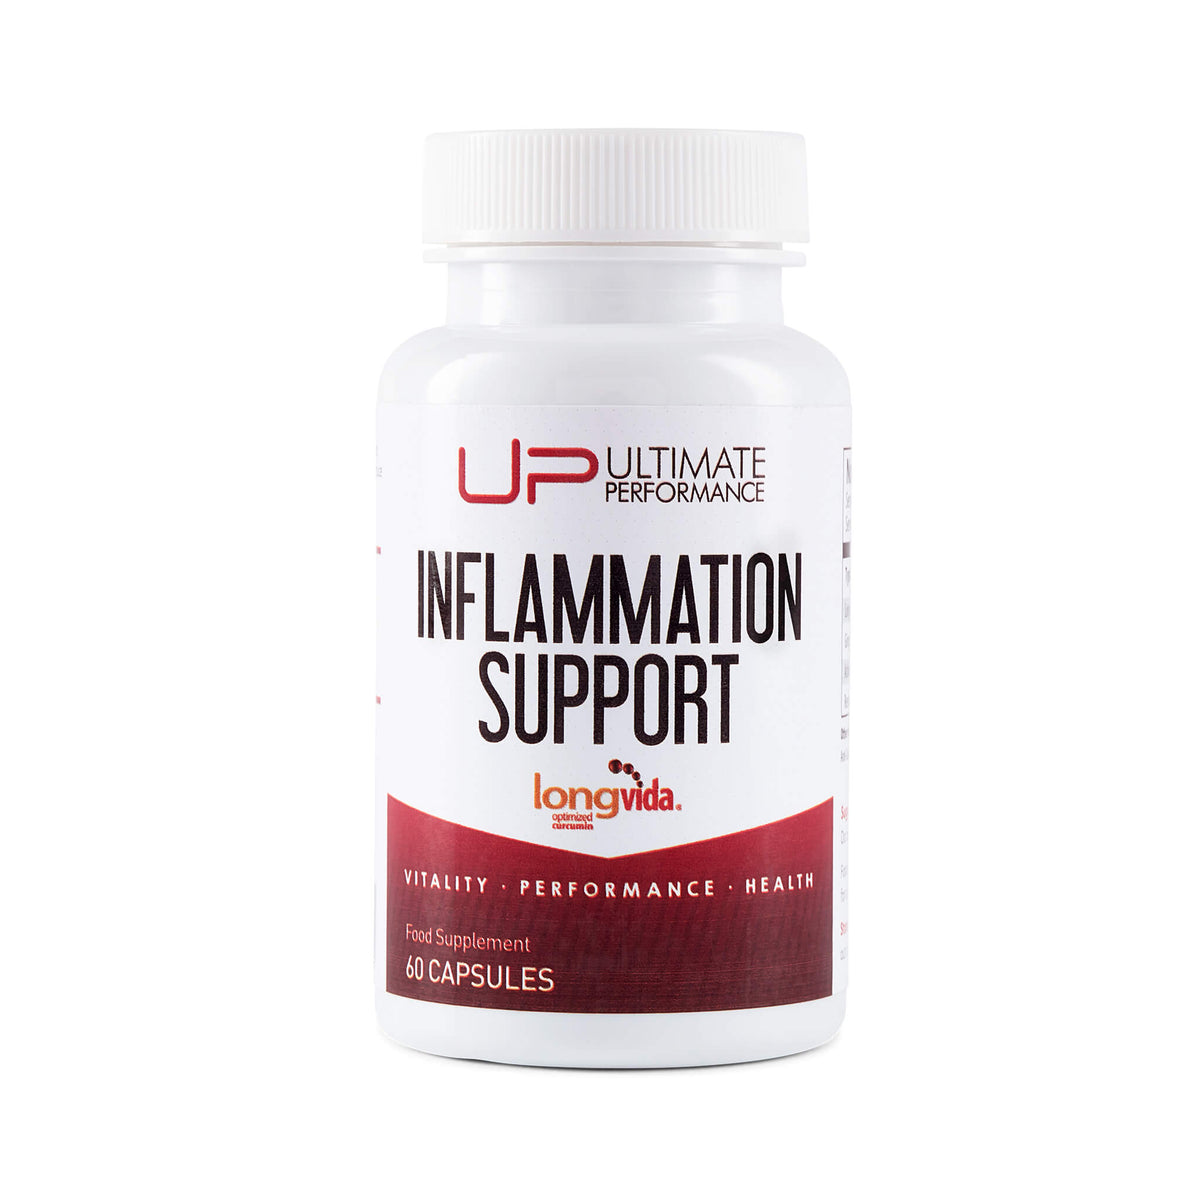 Inflammation Support